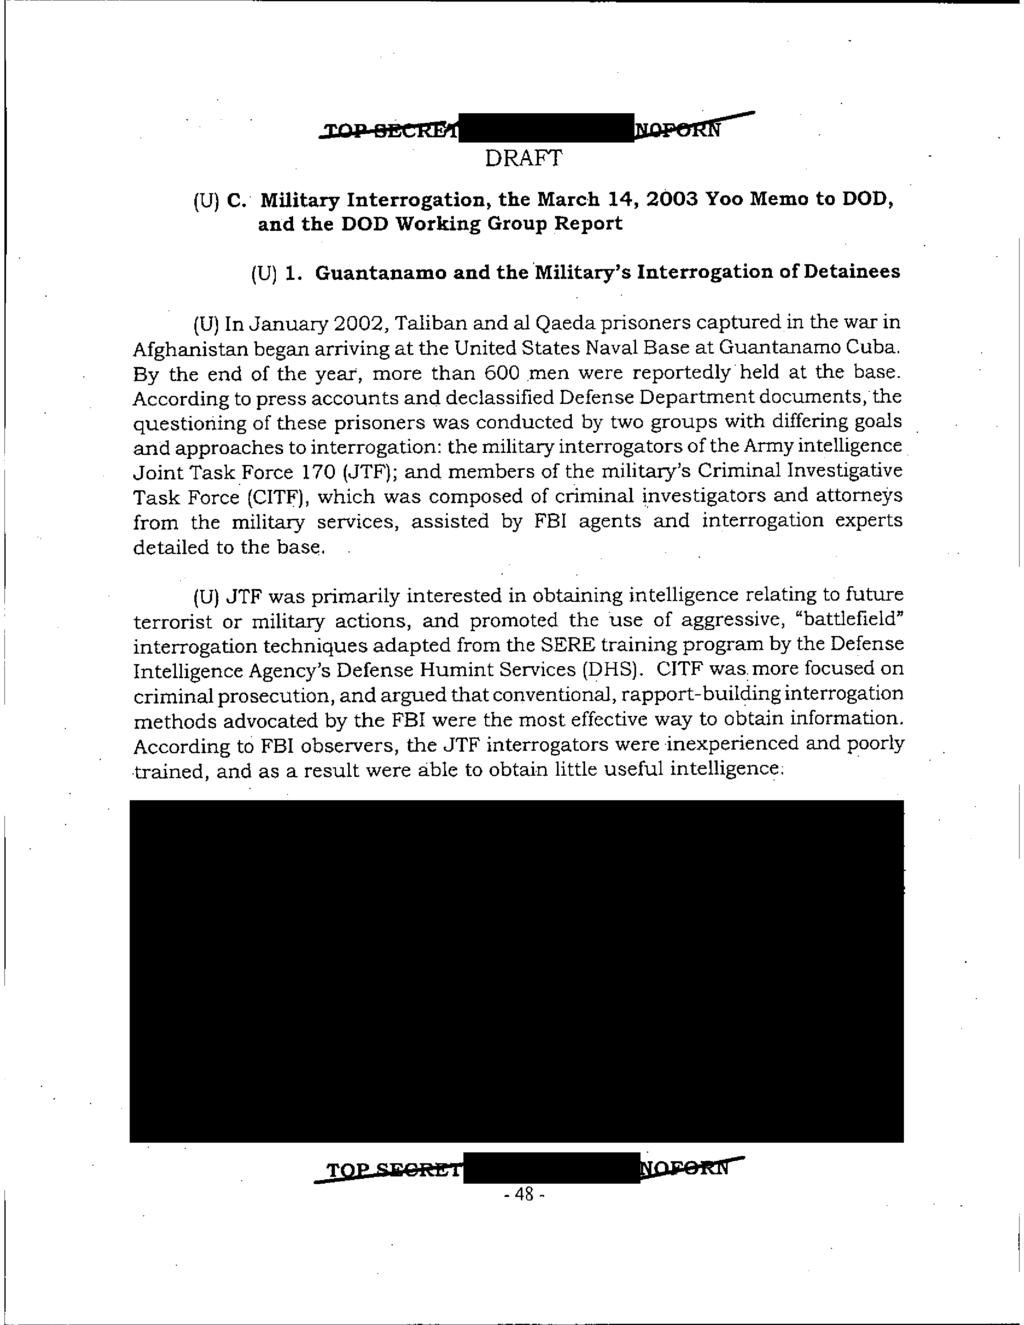 DRAFT (U) C. Military Interrogation, the March 14, 2003 Yoo Memo to DOD, and the DOD Working Group Report (U) 1.